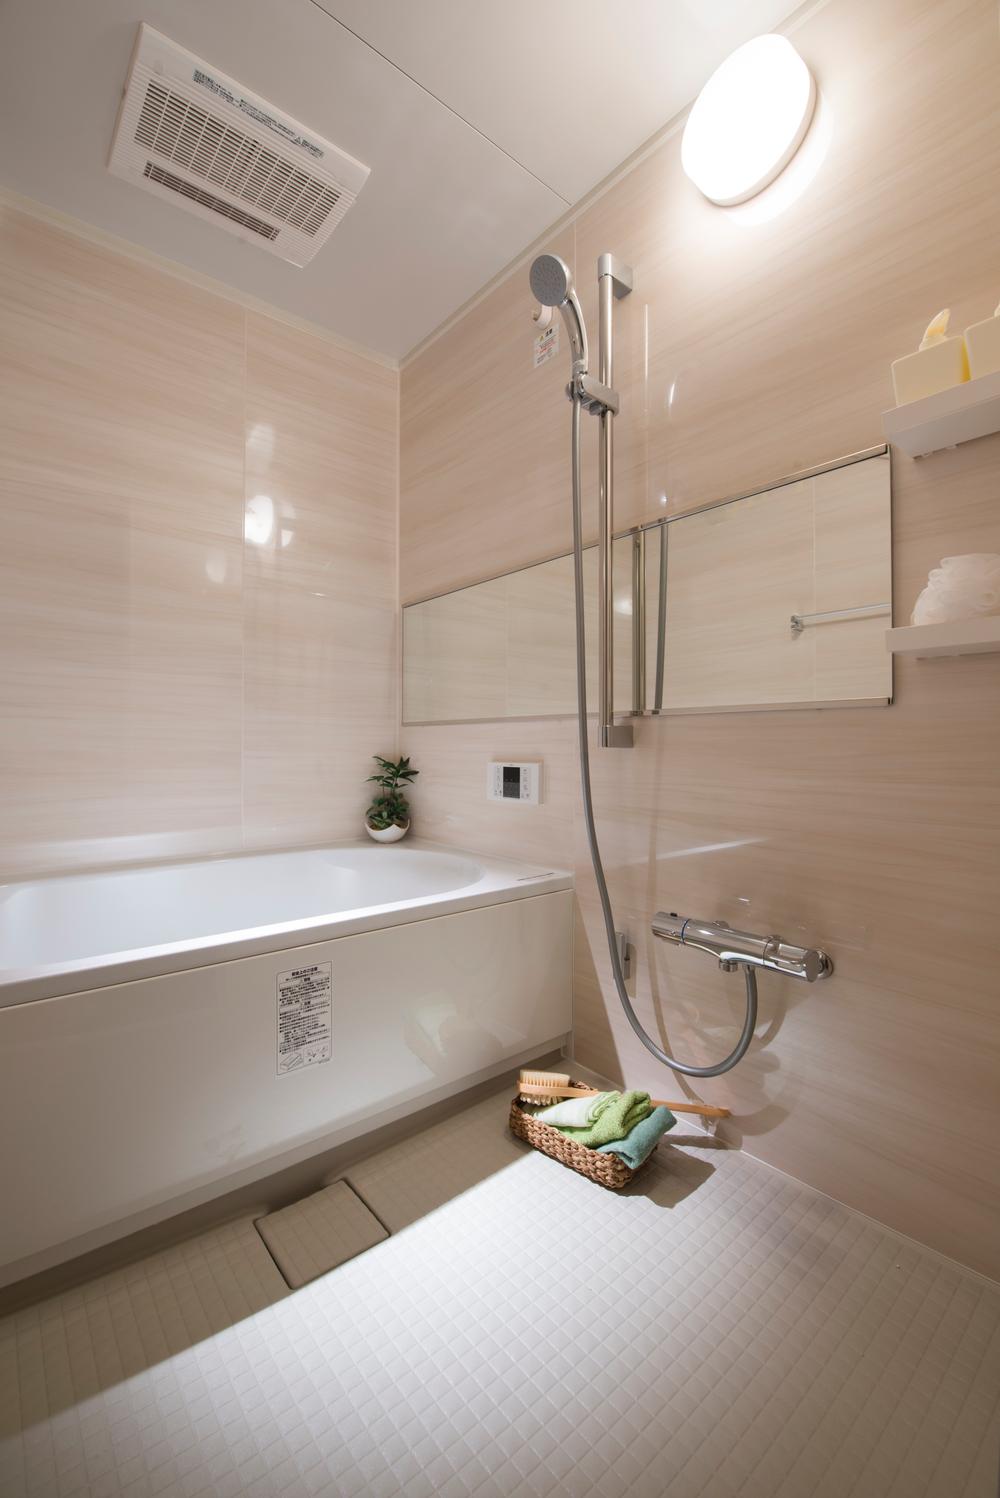 Bathroom. Clean and comfortable bathroom, Equipped with a 24-hour ventilation system. We have also installed a bathroom ventilation drying heater to dry out the laundry in the day or at night rain.